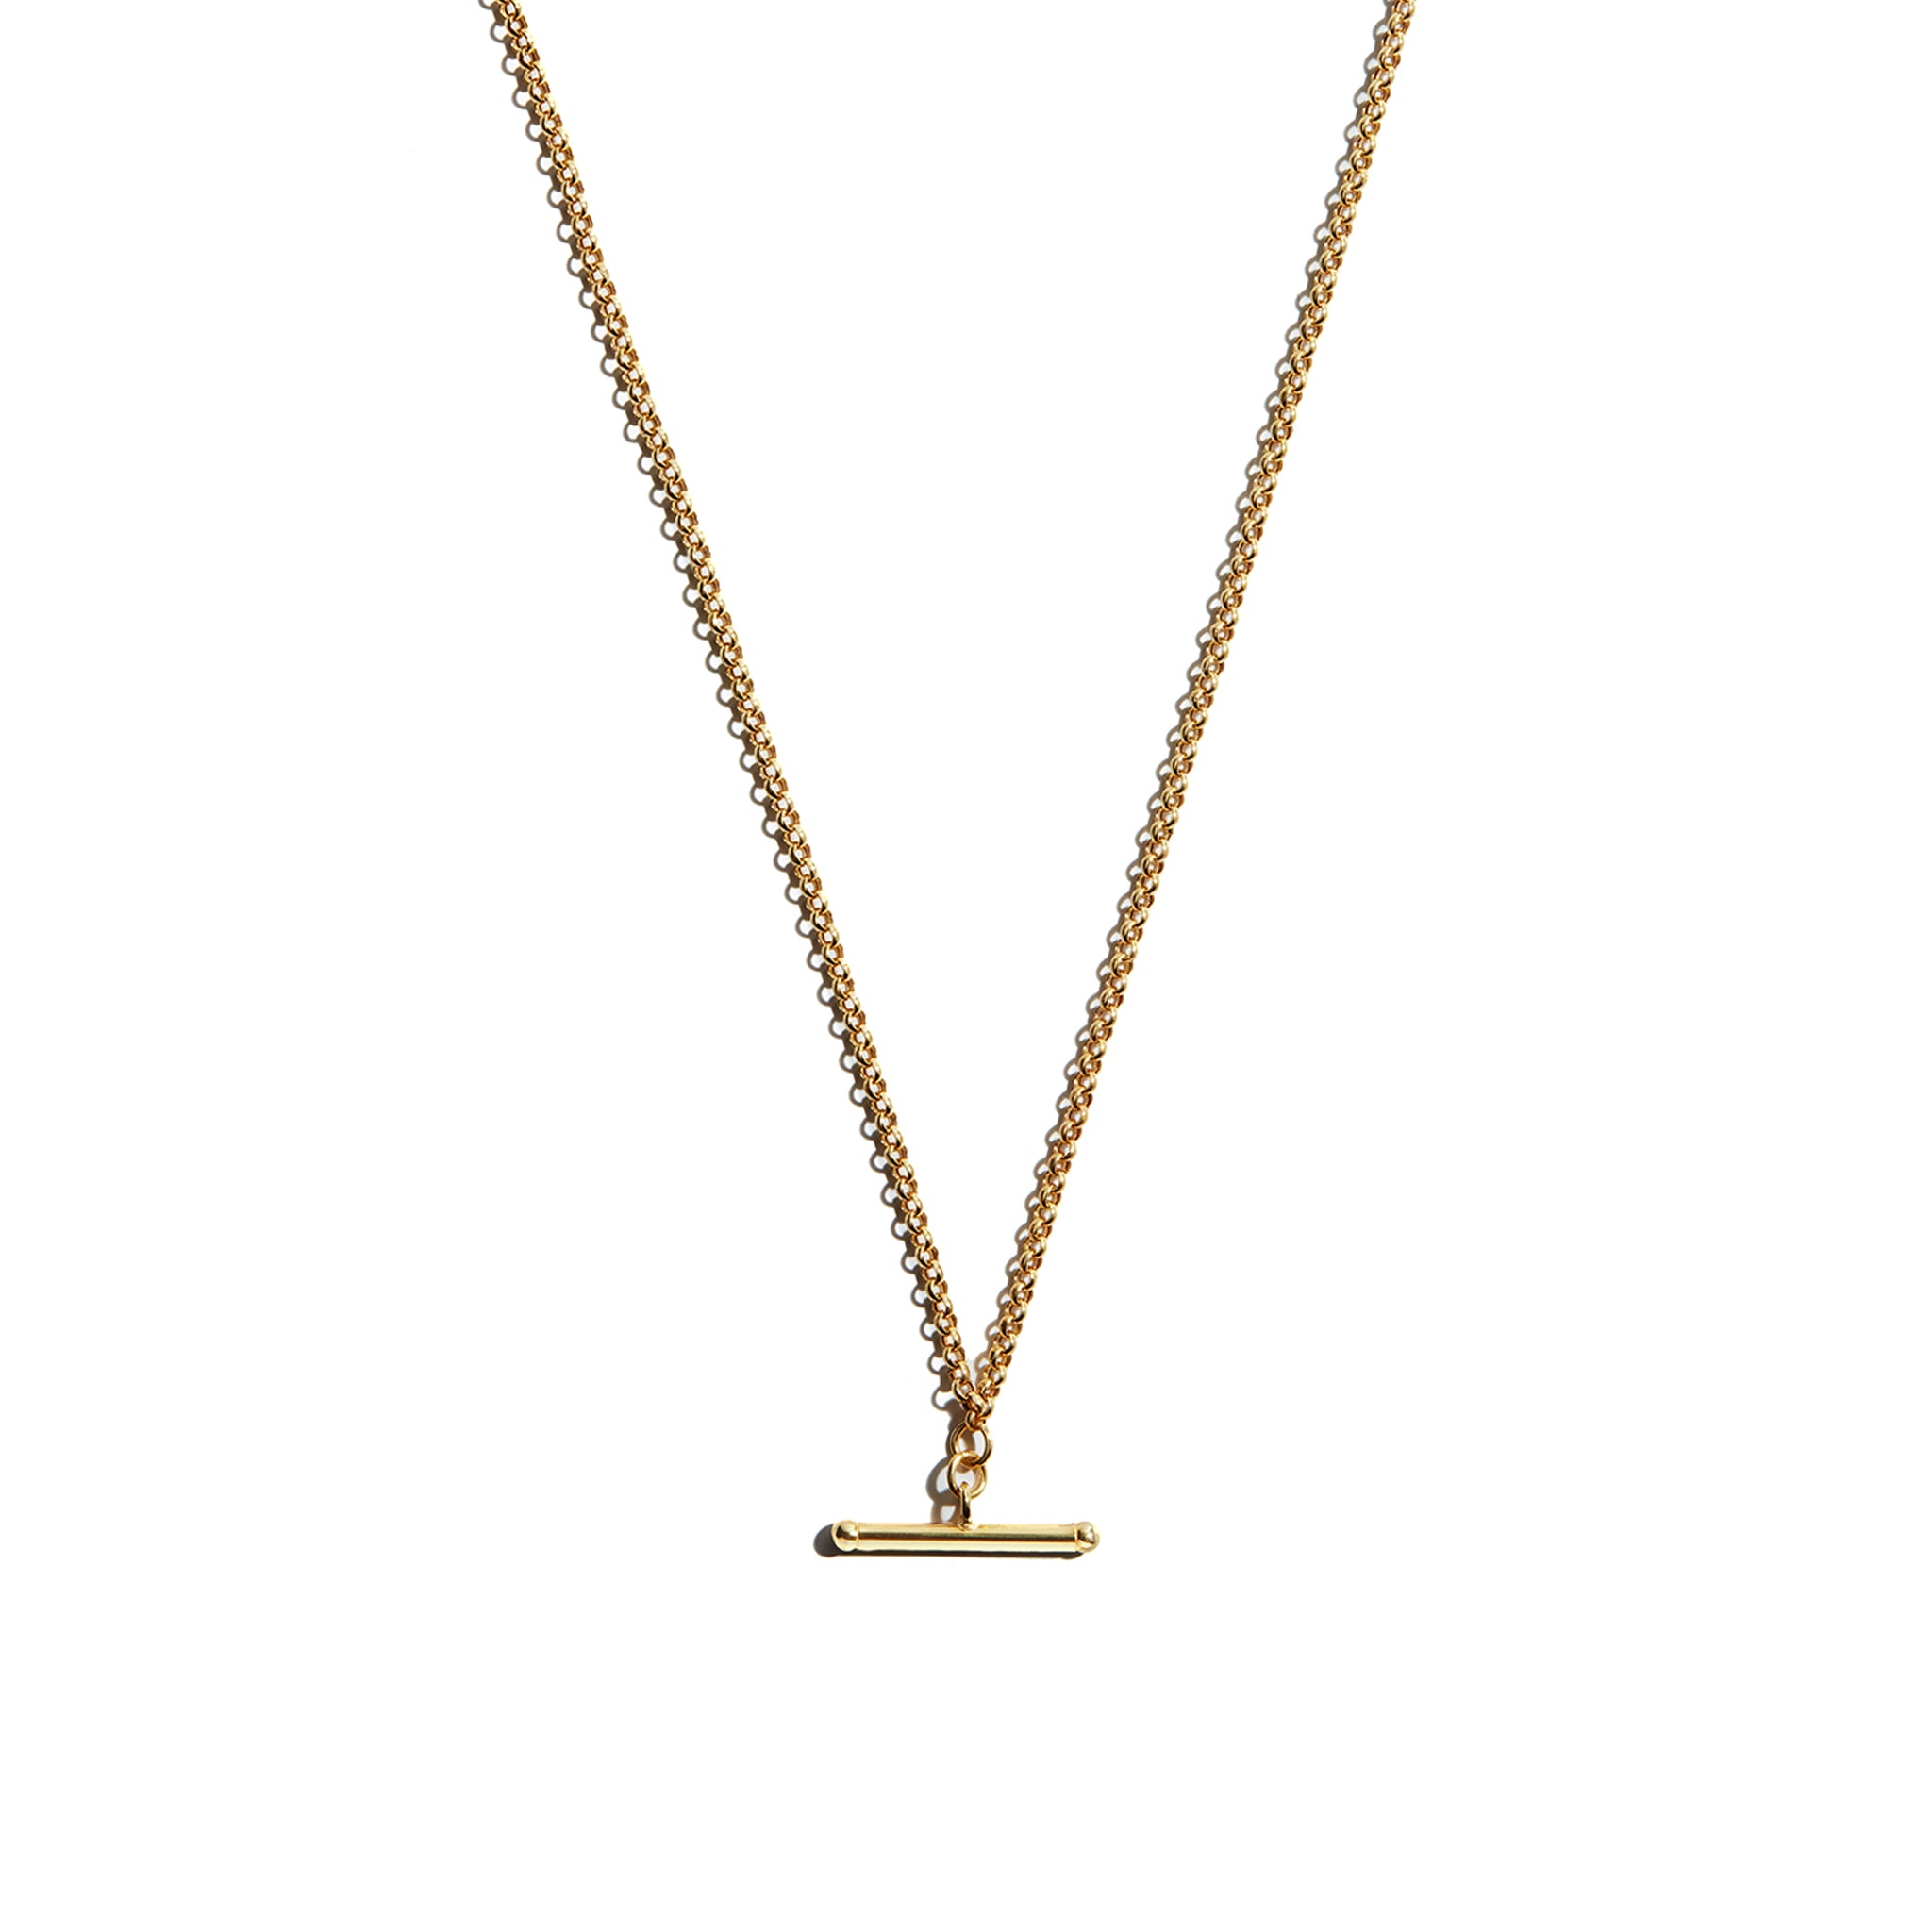 Elevate your ensemble with the 9 carat yellow gold T-Bar Belcher Chain Necklace. This classic accessory features a sleek and polished T-Bar design, perfect for adding a touch of sophistication and elegance to any outfit.